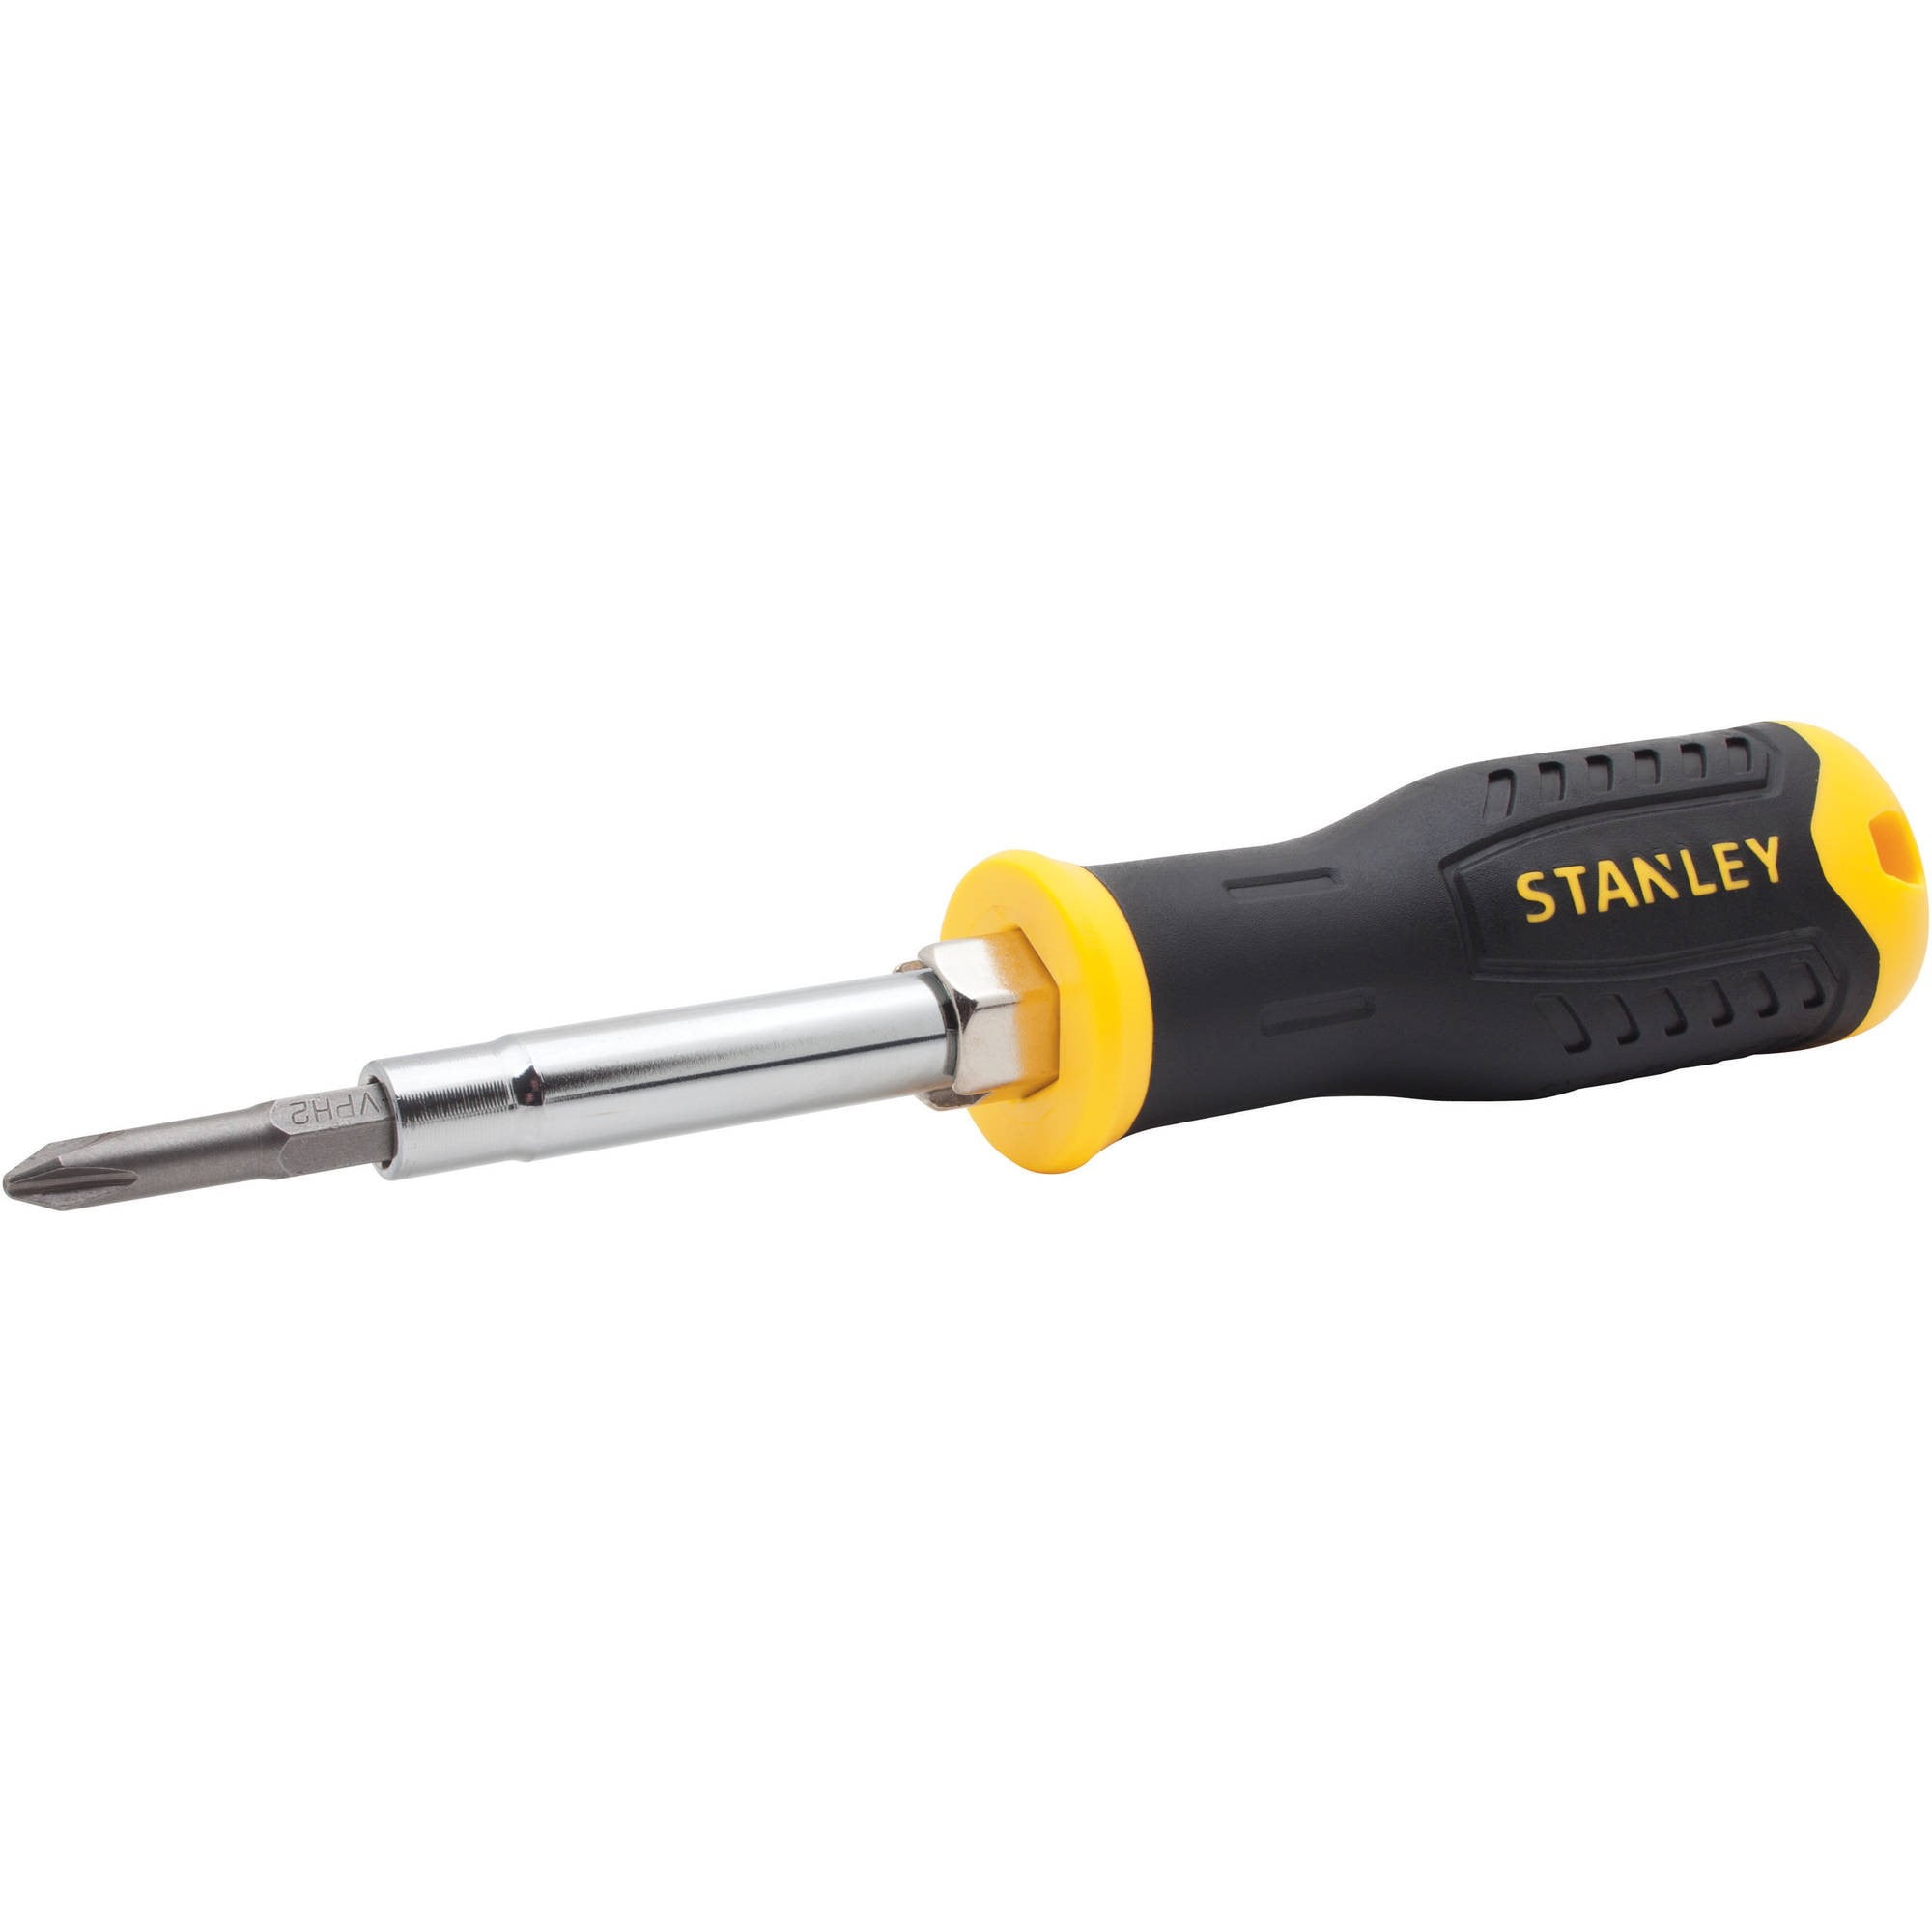 Stanley Tools 6 Way Screwdriver Carded STA068012 